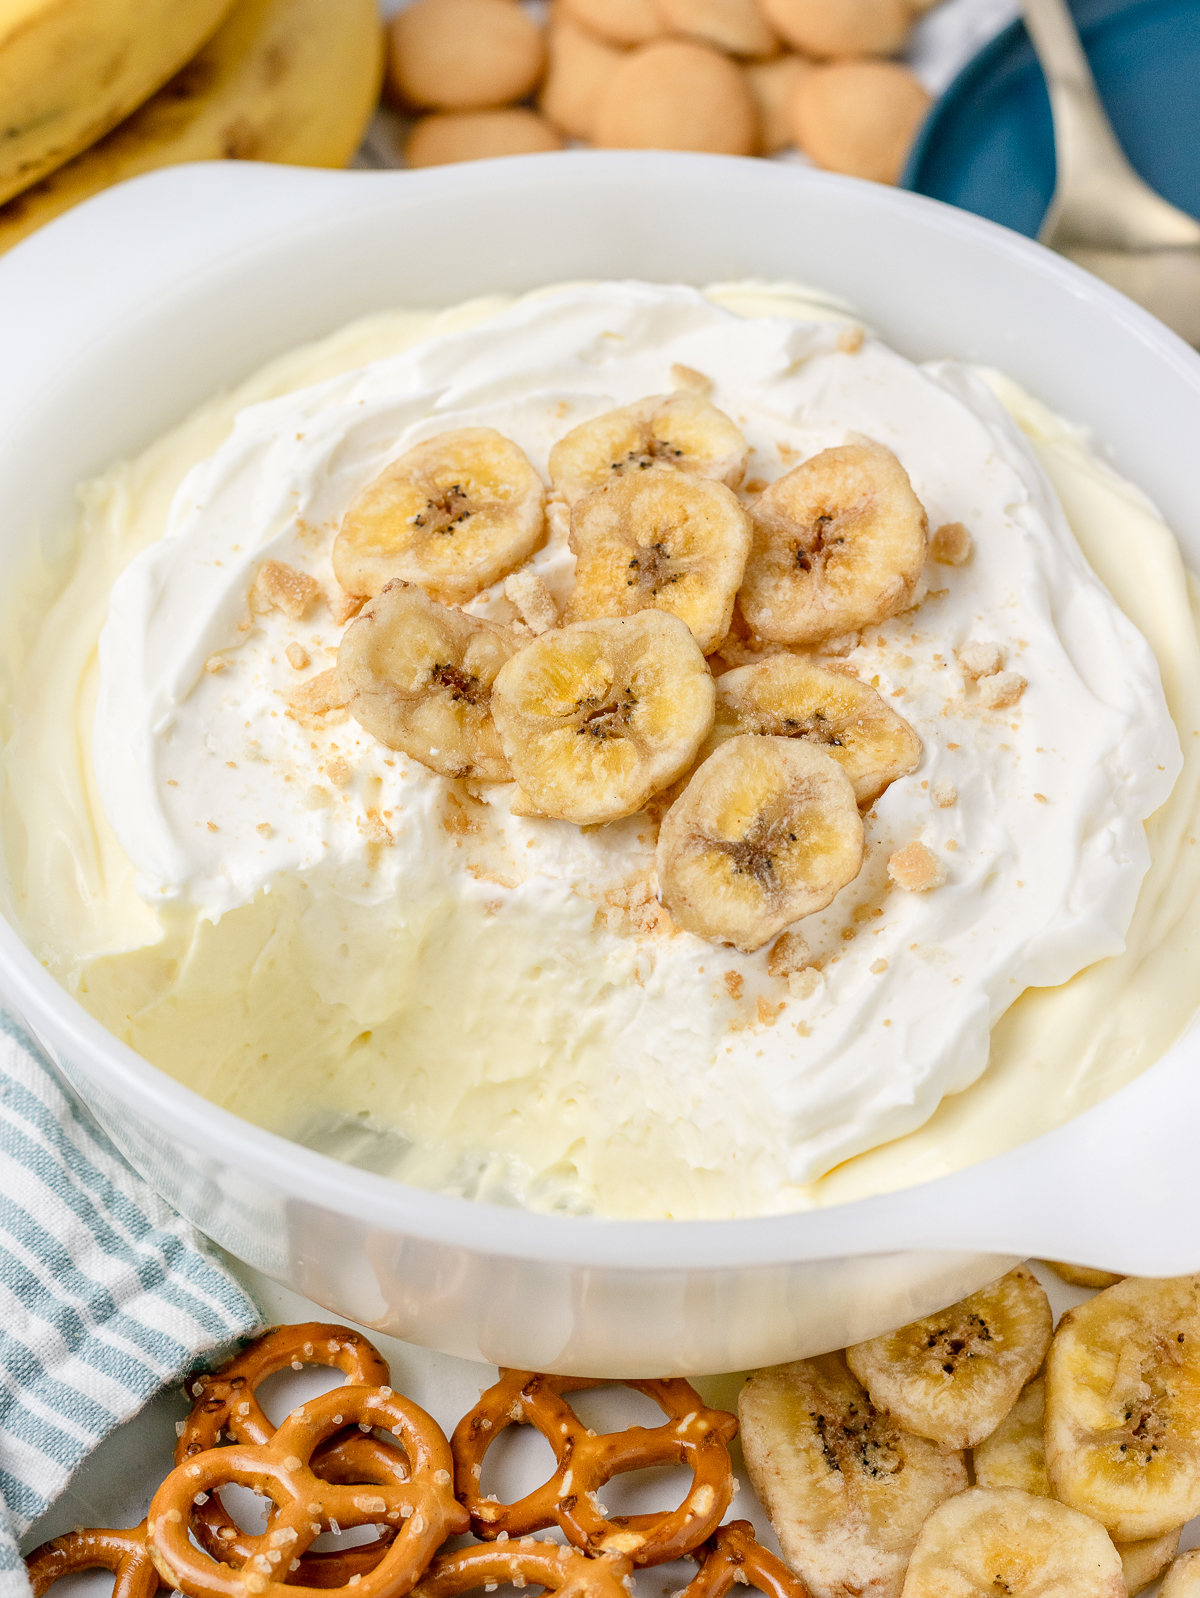 A big scoop of dip taken out of the dish to reveal layers of banana cream pie and whipped cream that is topped with crushed vanilla wafers, and banana chips.